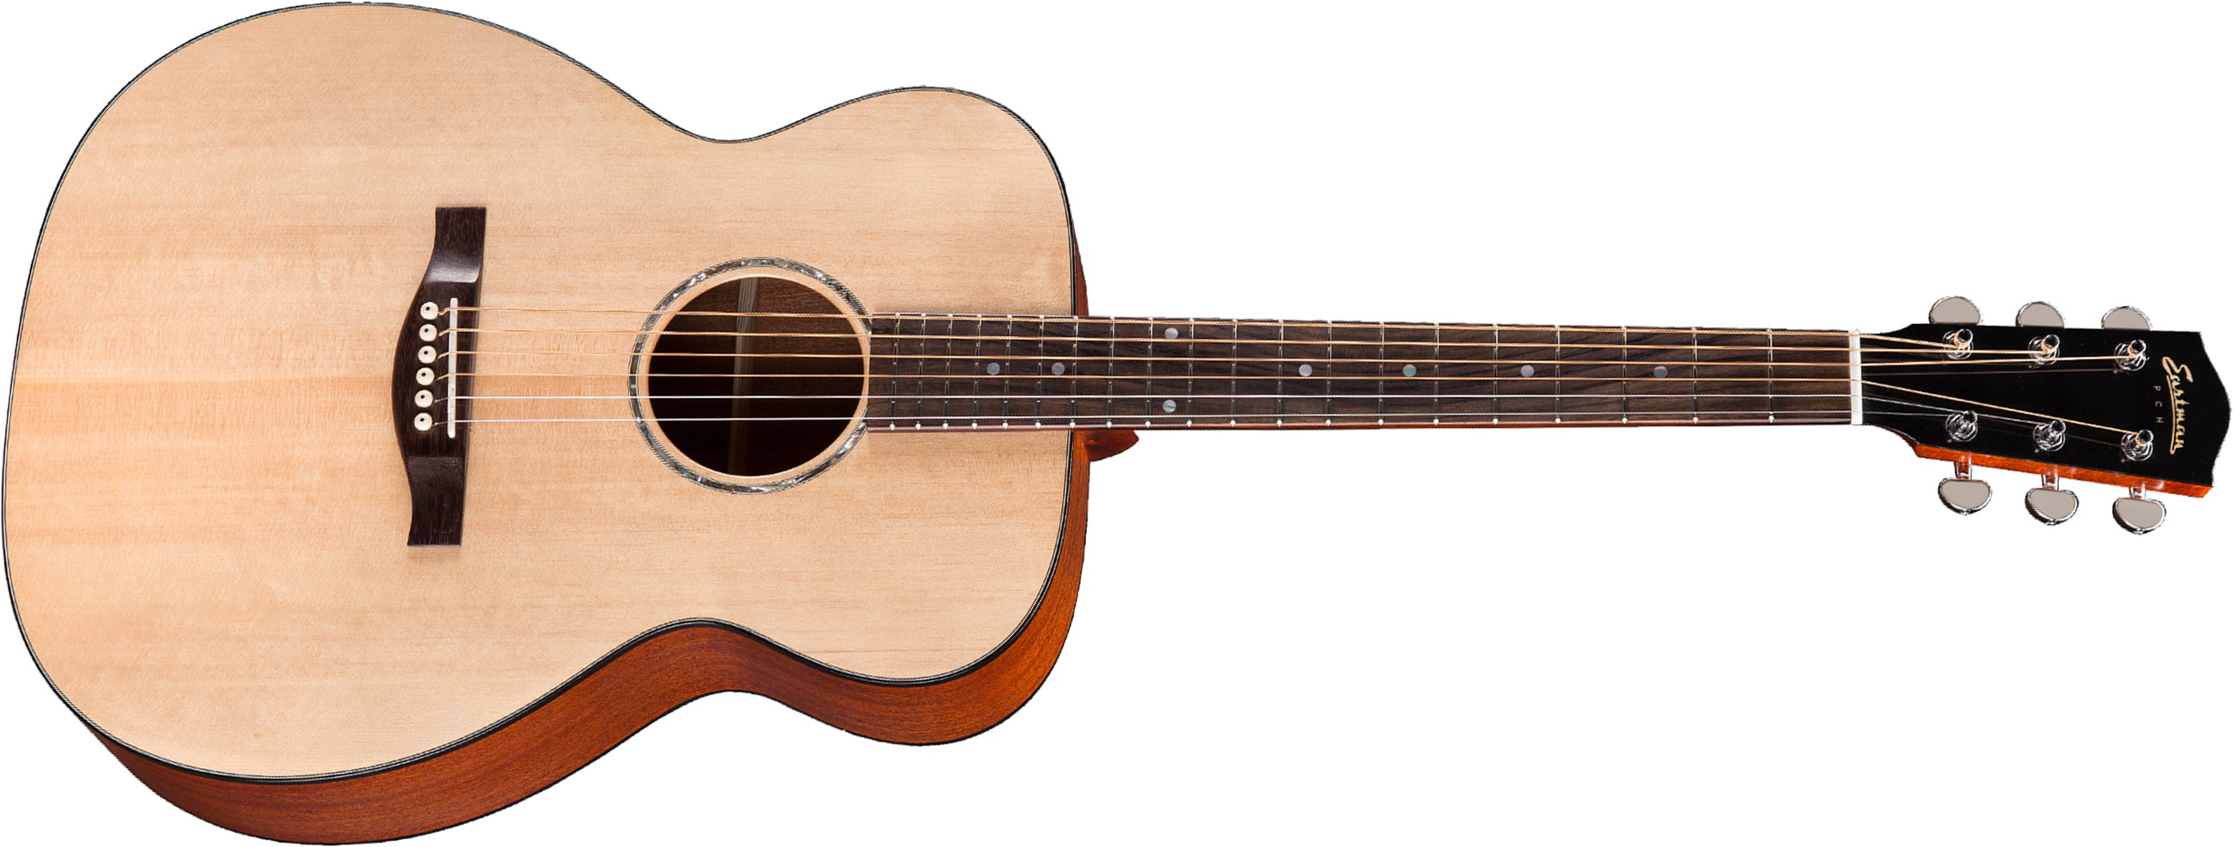 Eastman Pch1-om Orchestra Model Epicea Sapele Rw - Natural Satin - Acoustic guitar & electro - Main picture